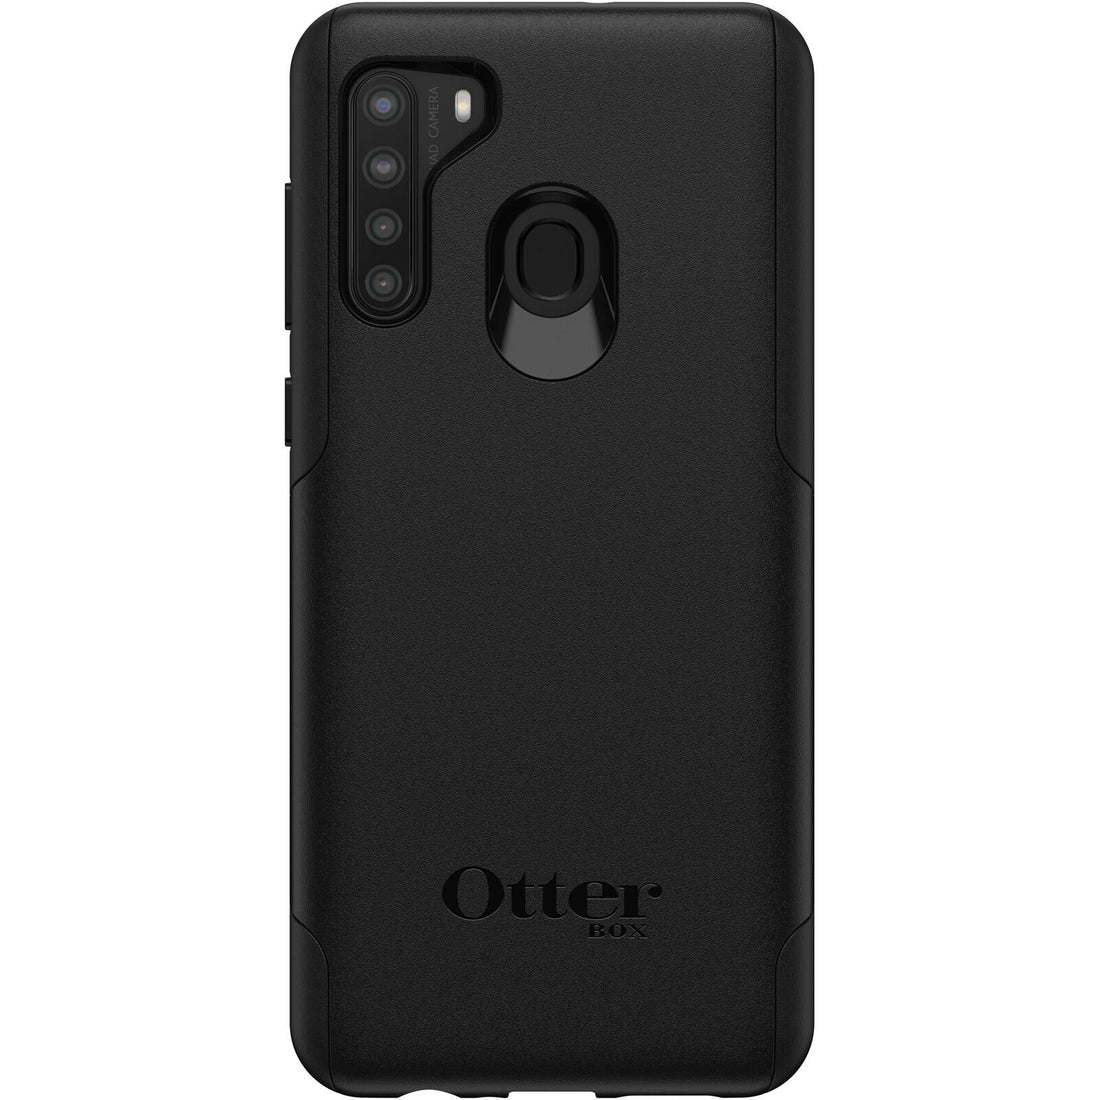 OtterBox COMMUTER LITE Case for Samsung Galaxy A21 - Black (New)